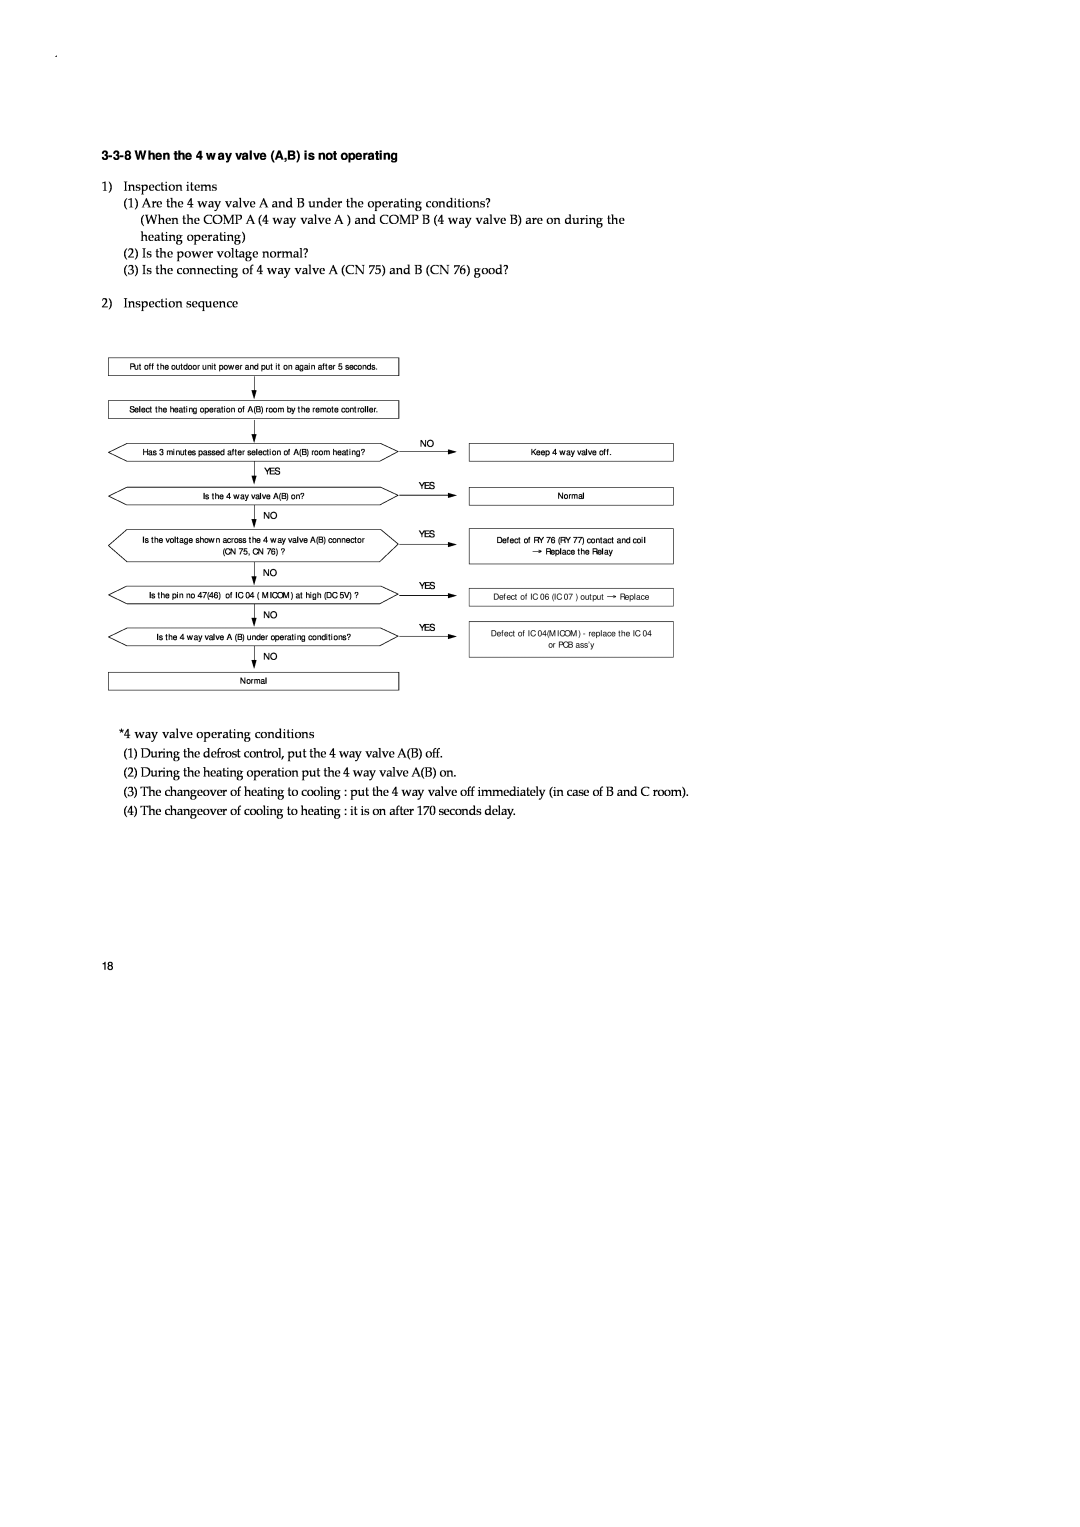 Samsung AD26B1C13, UD26B1C2, UD18B1C2, AD18B1C09 service manual 3-3-8When the 4 way valve A,B is not operating 